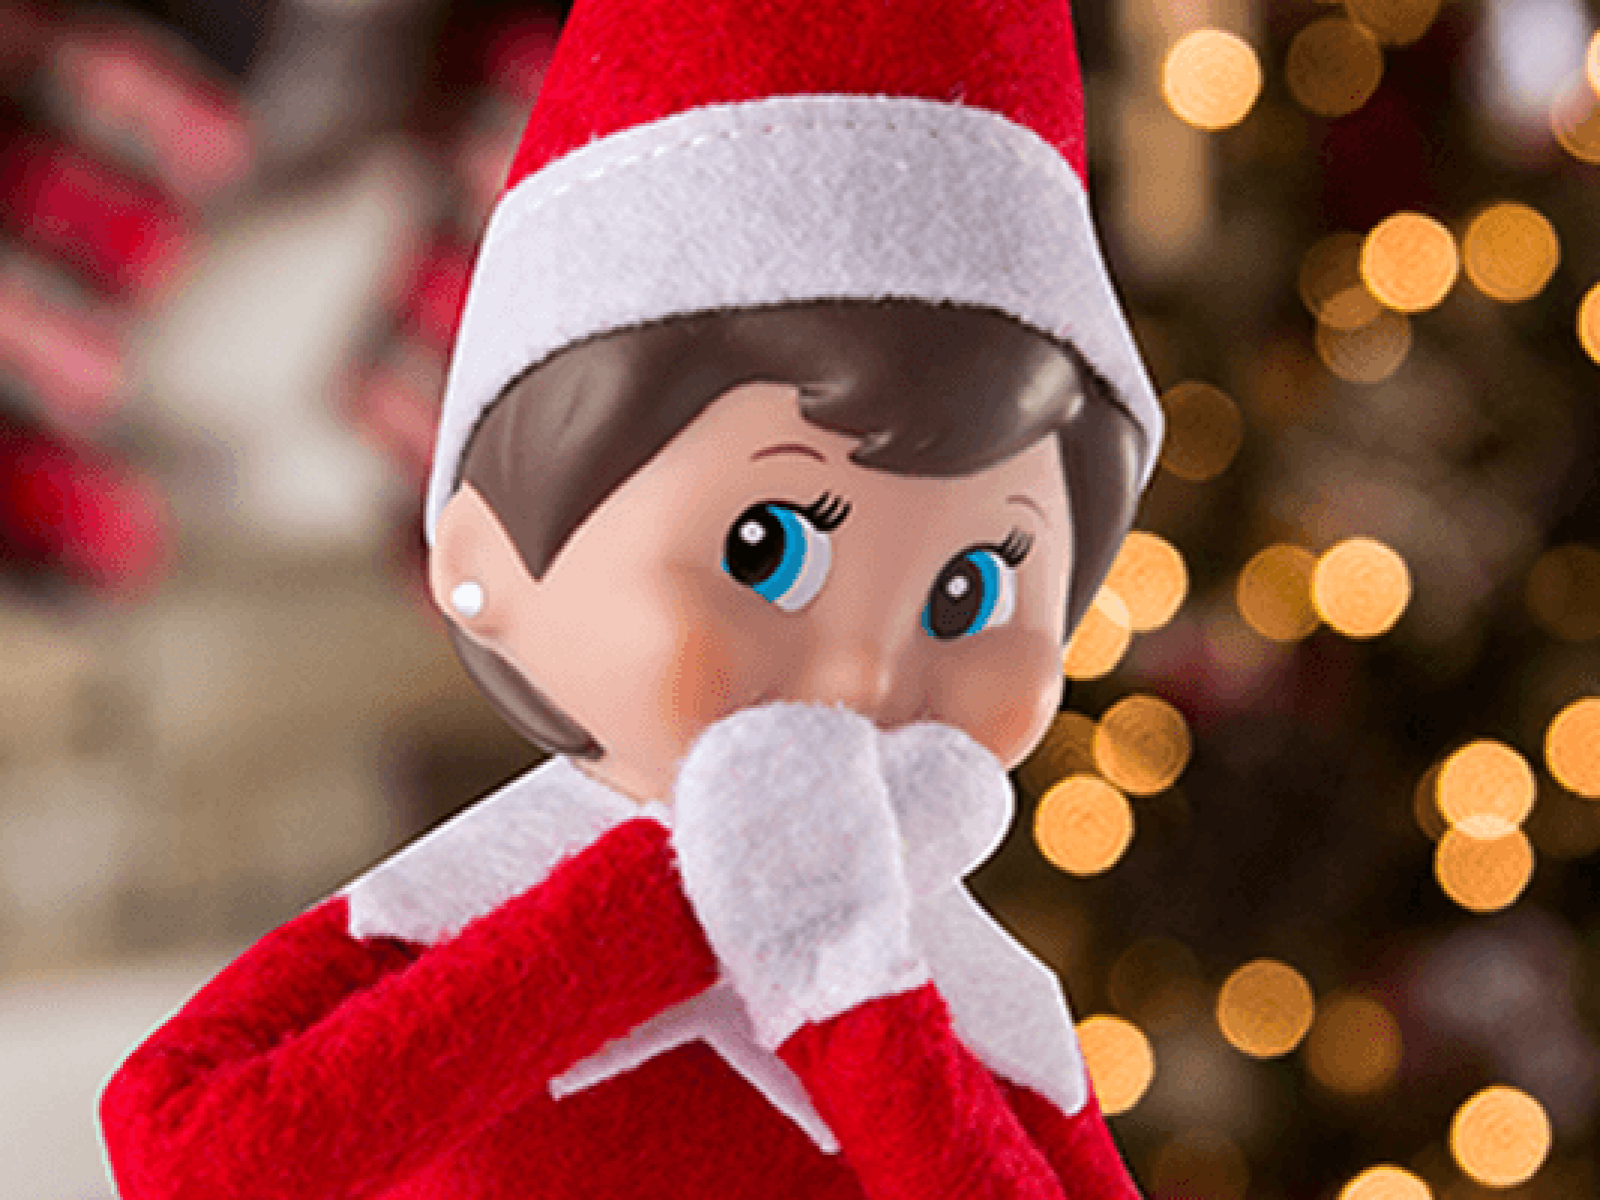 Best Elf On The Shelf Ideas 19 New And Easy Ideas Where To Buy And How To Register The Elf S Name